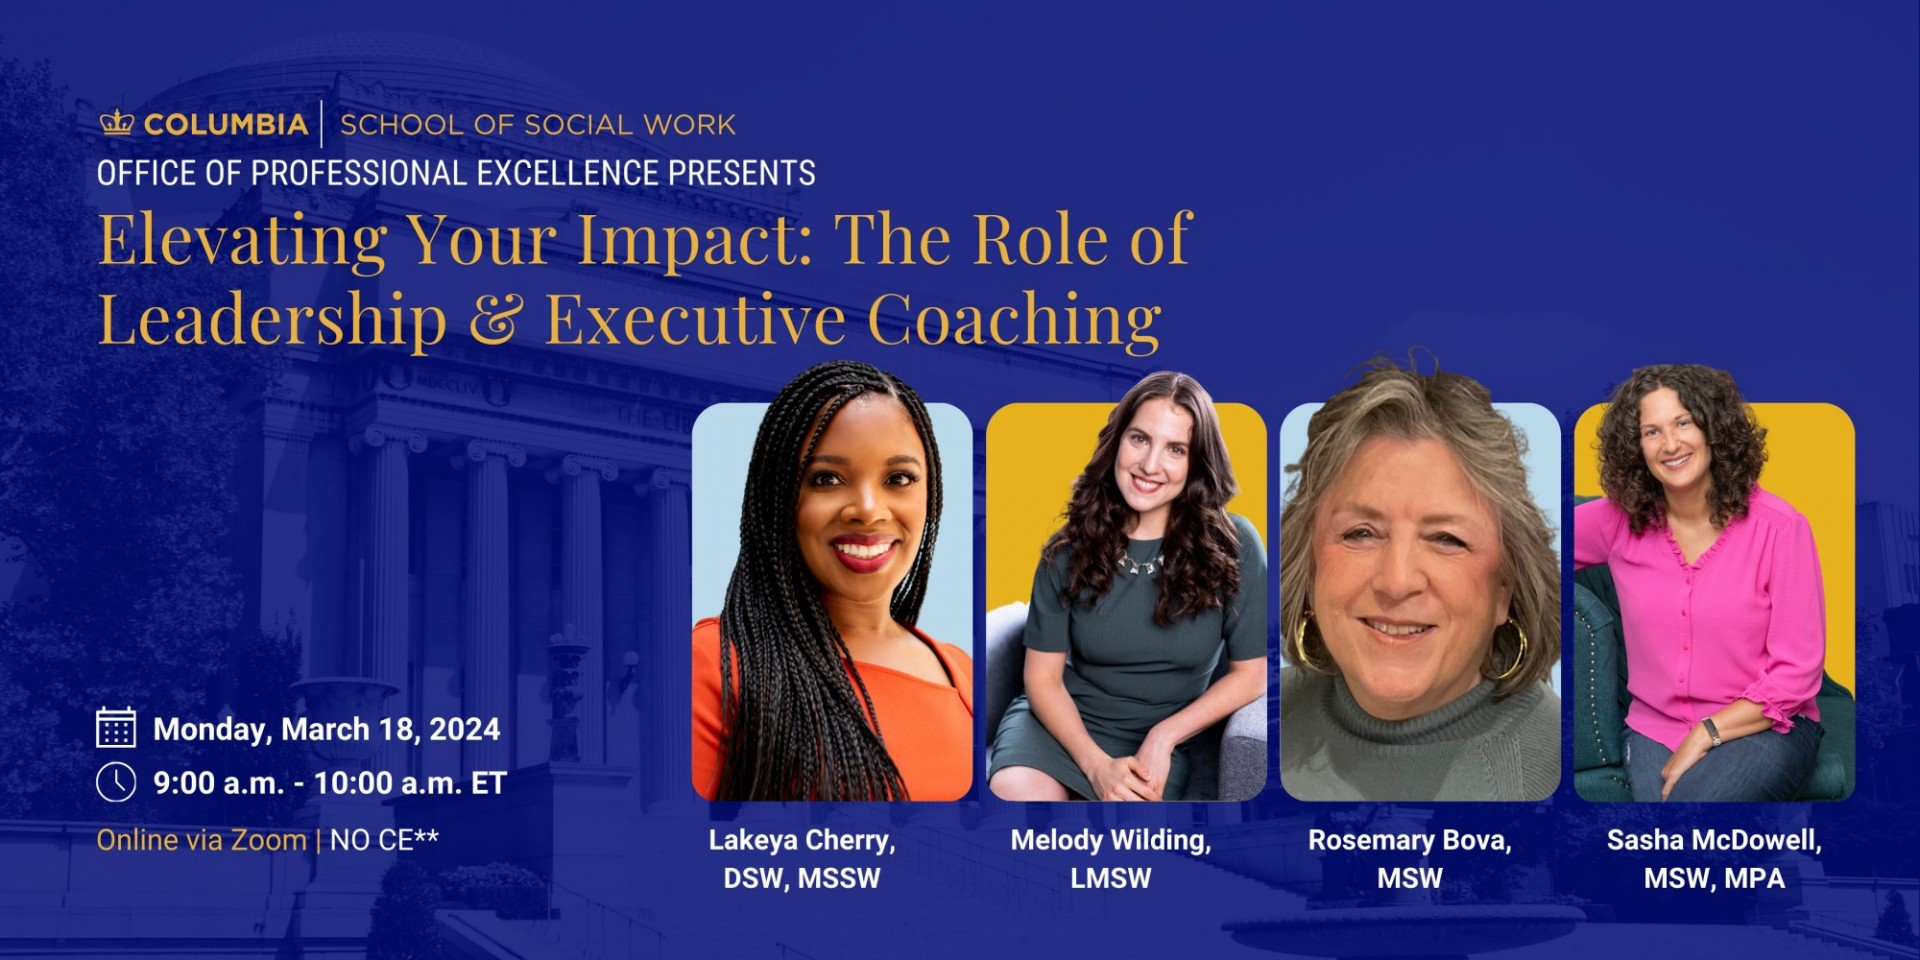 Elevating Your Impact: The Role of Leadership & Executive Coaching